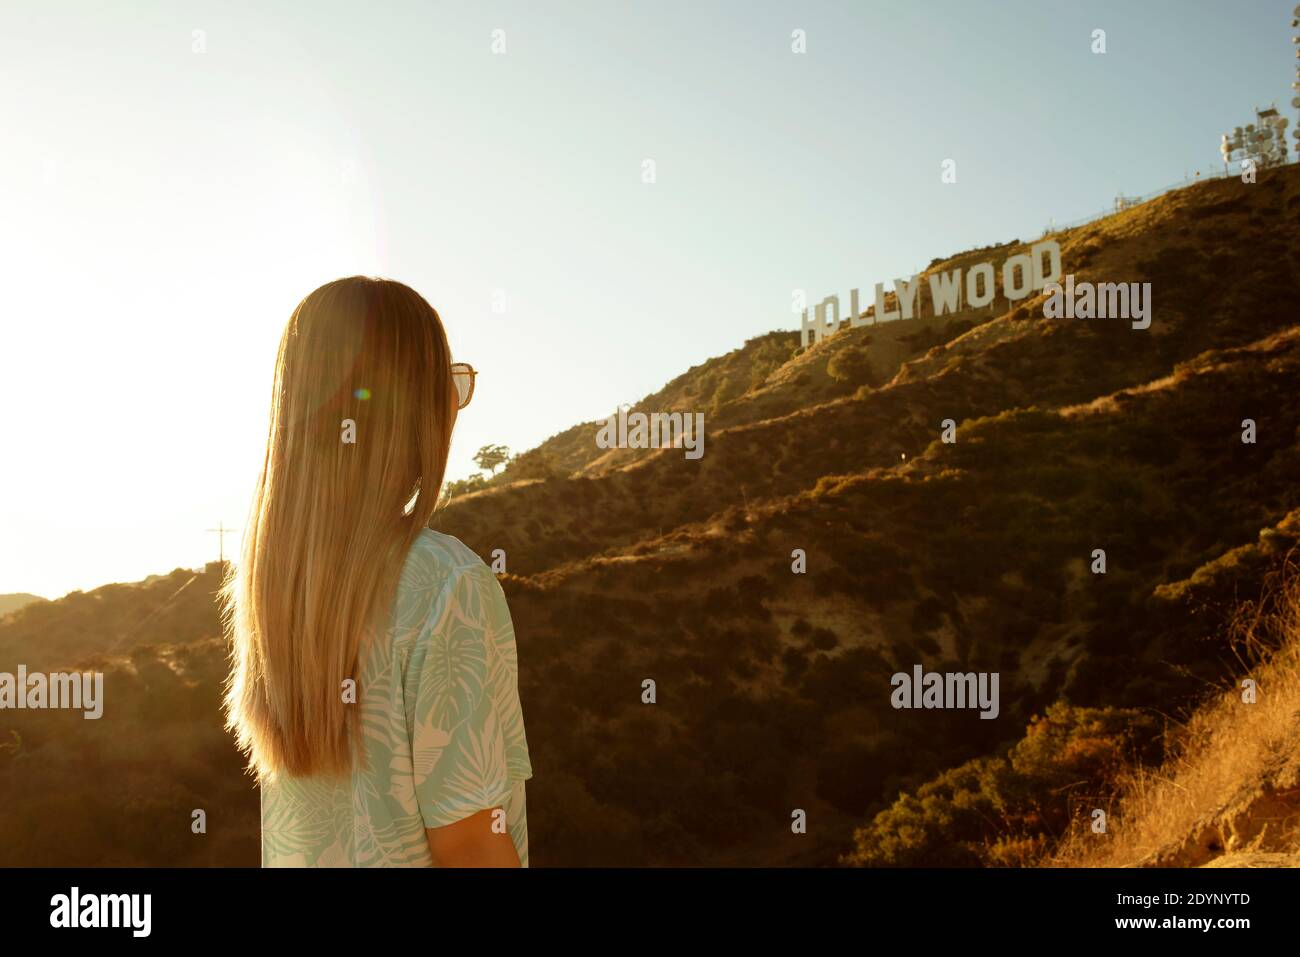 Rear view of girl looking at The Hollywood Sign, Los Angeles, California, US. Aug 2019 Stock Photo